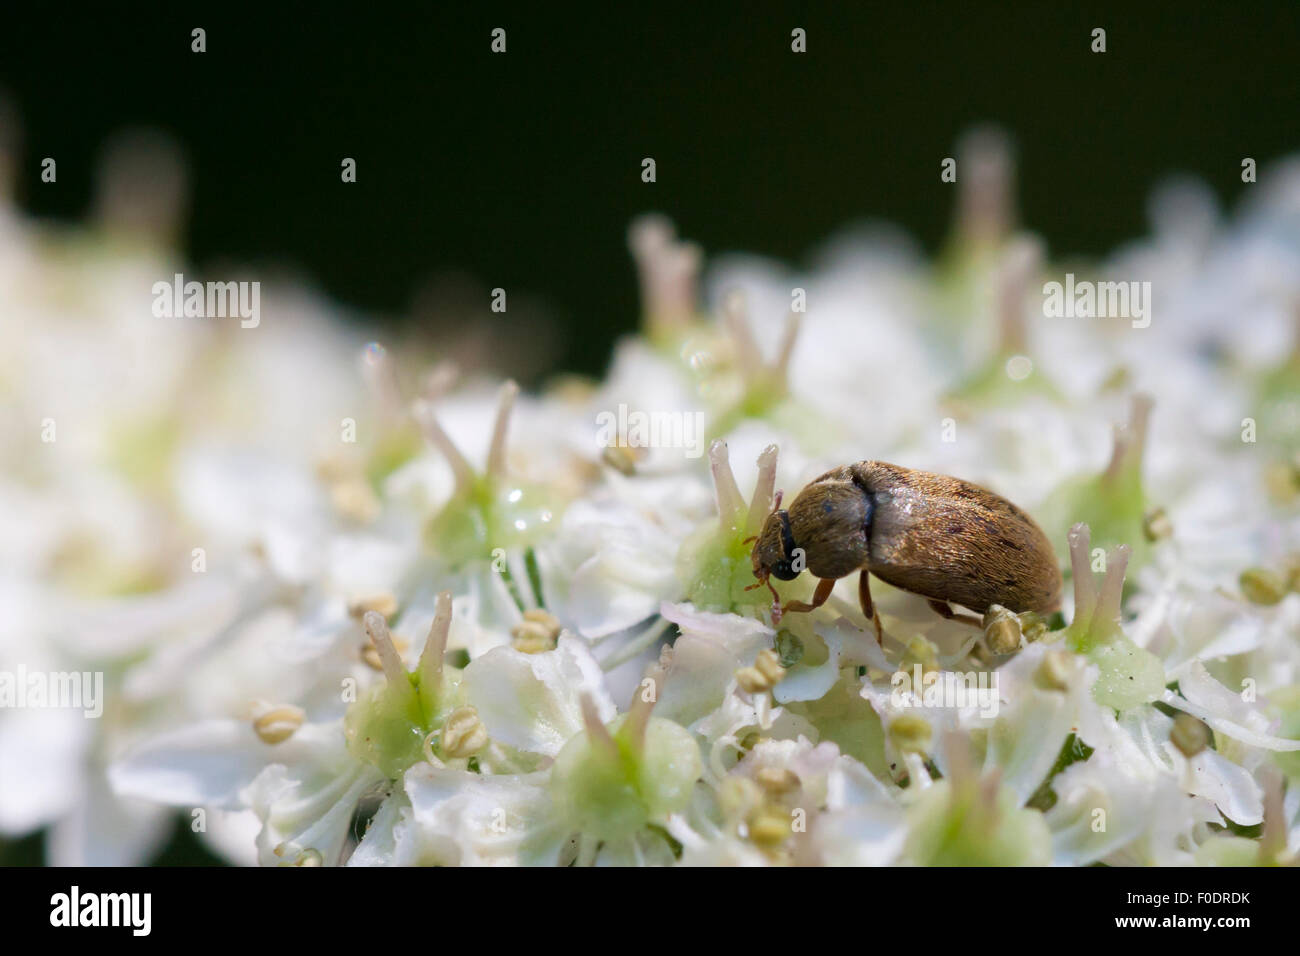 A furry Fruitworm Beetle on a Cow Parsley flower  From size and dark brown colour t Stock Photo